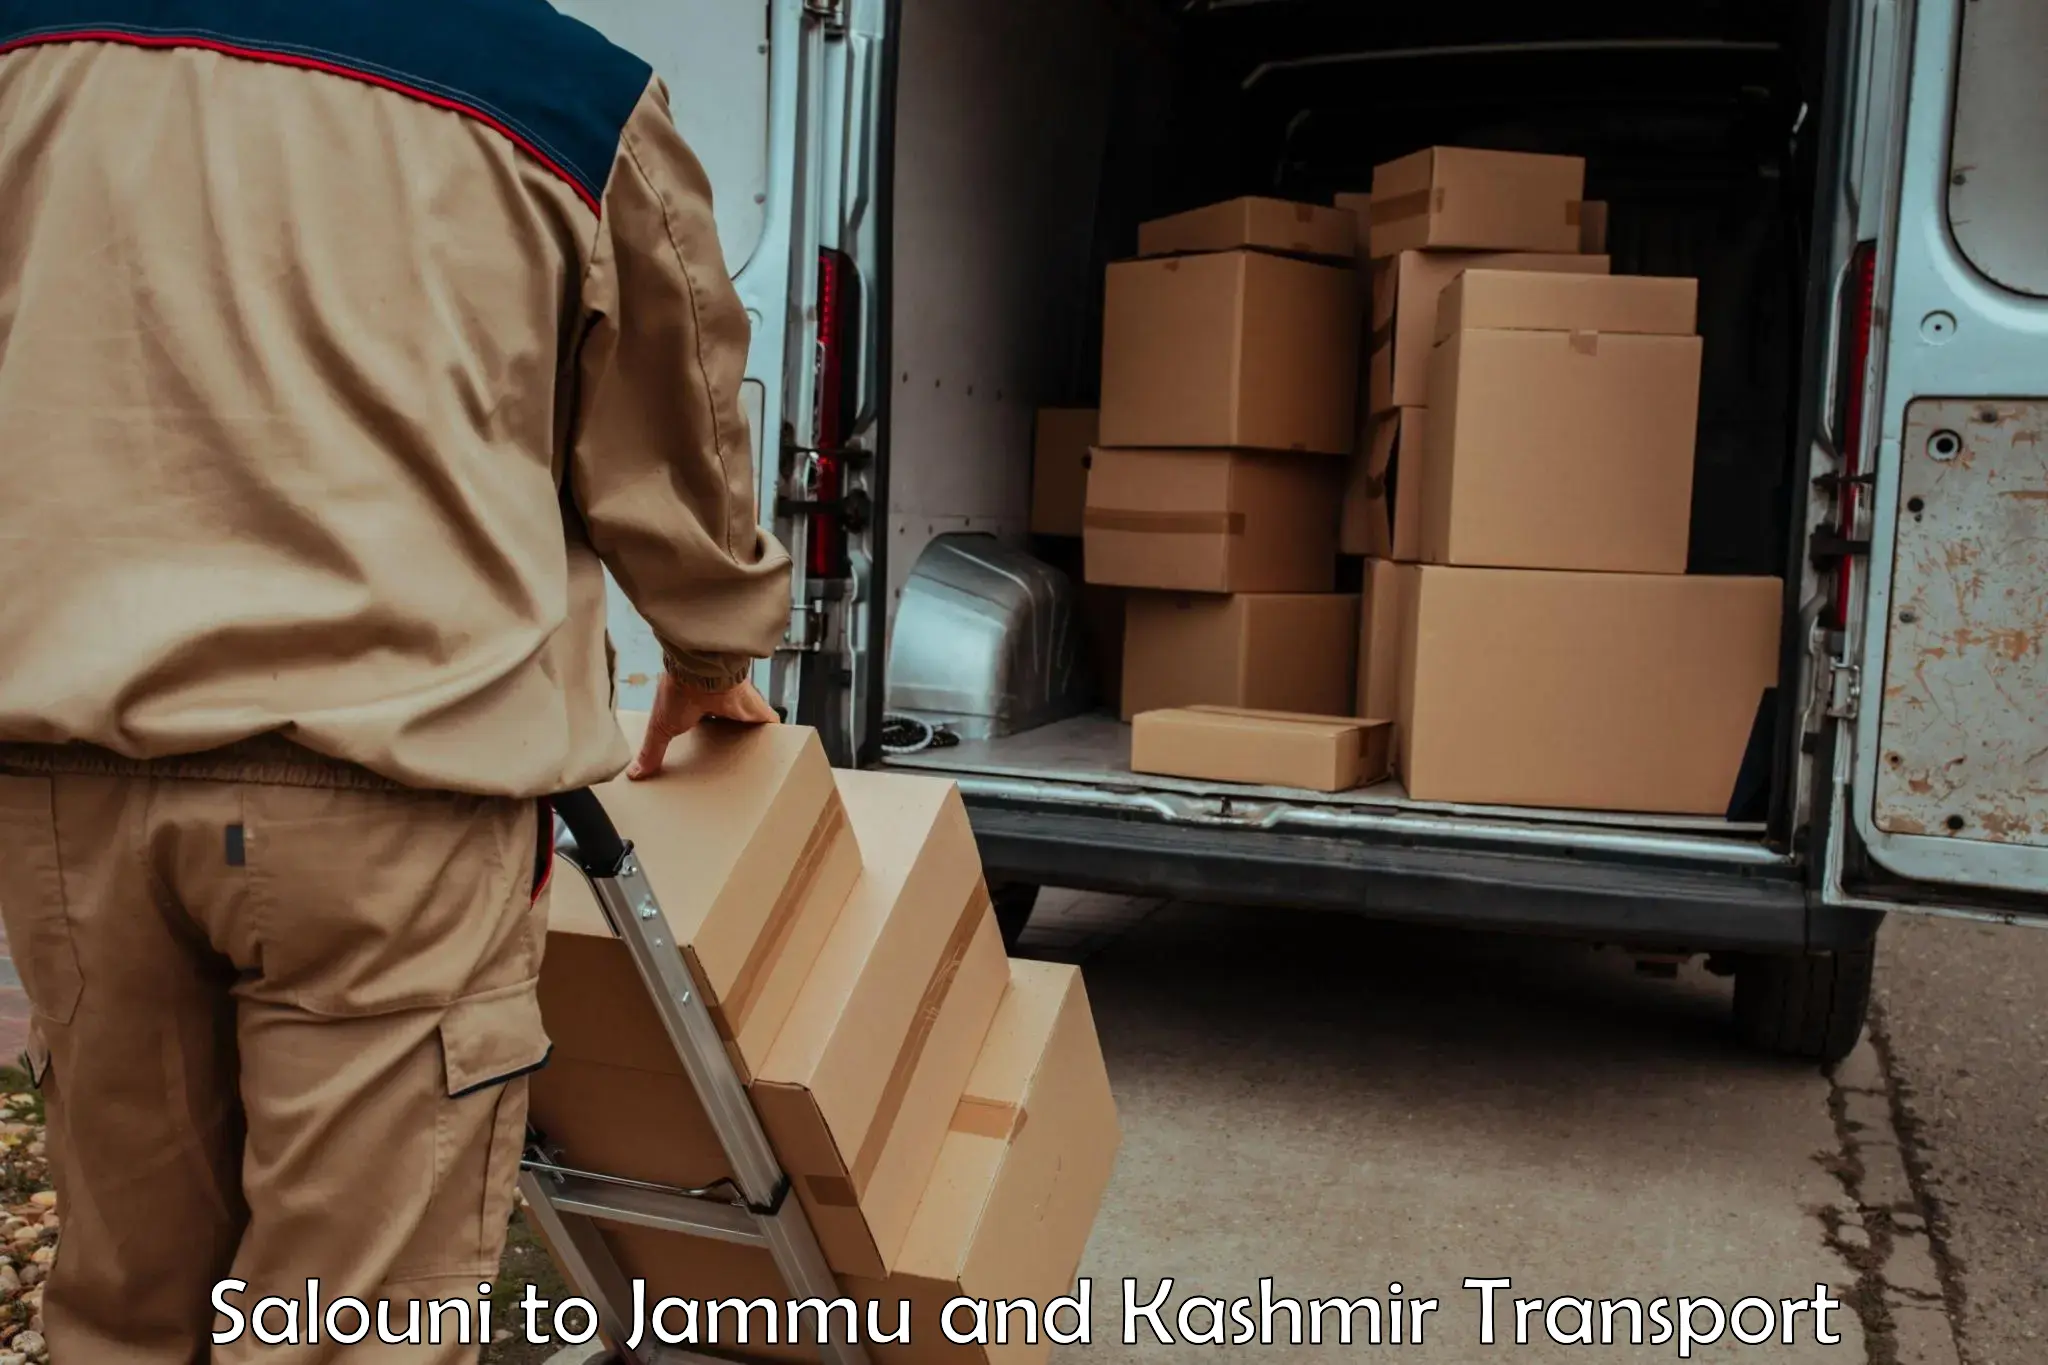 Daily parcel service transport in Salouni to Jammu and Kashmir